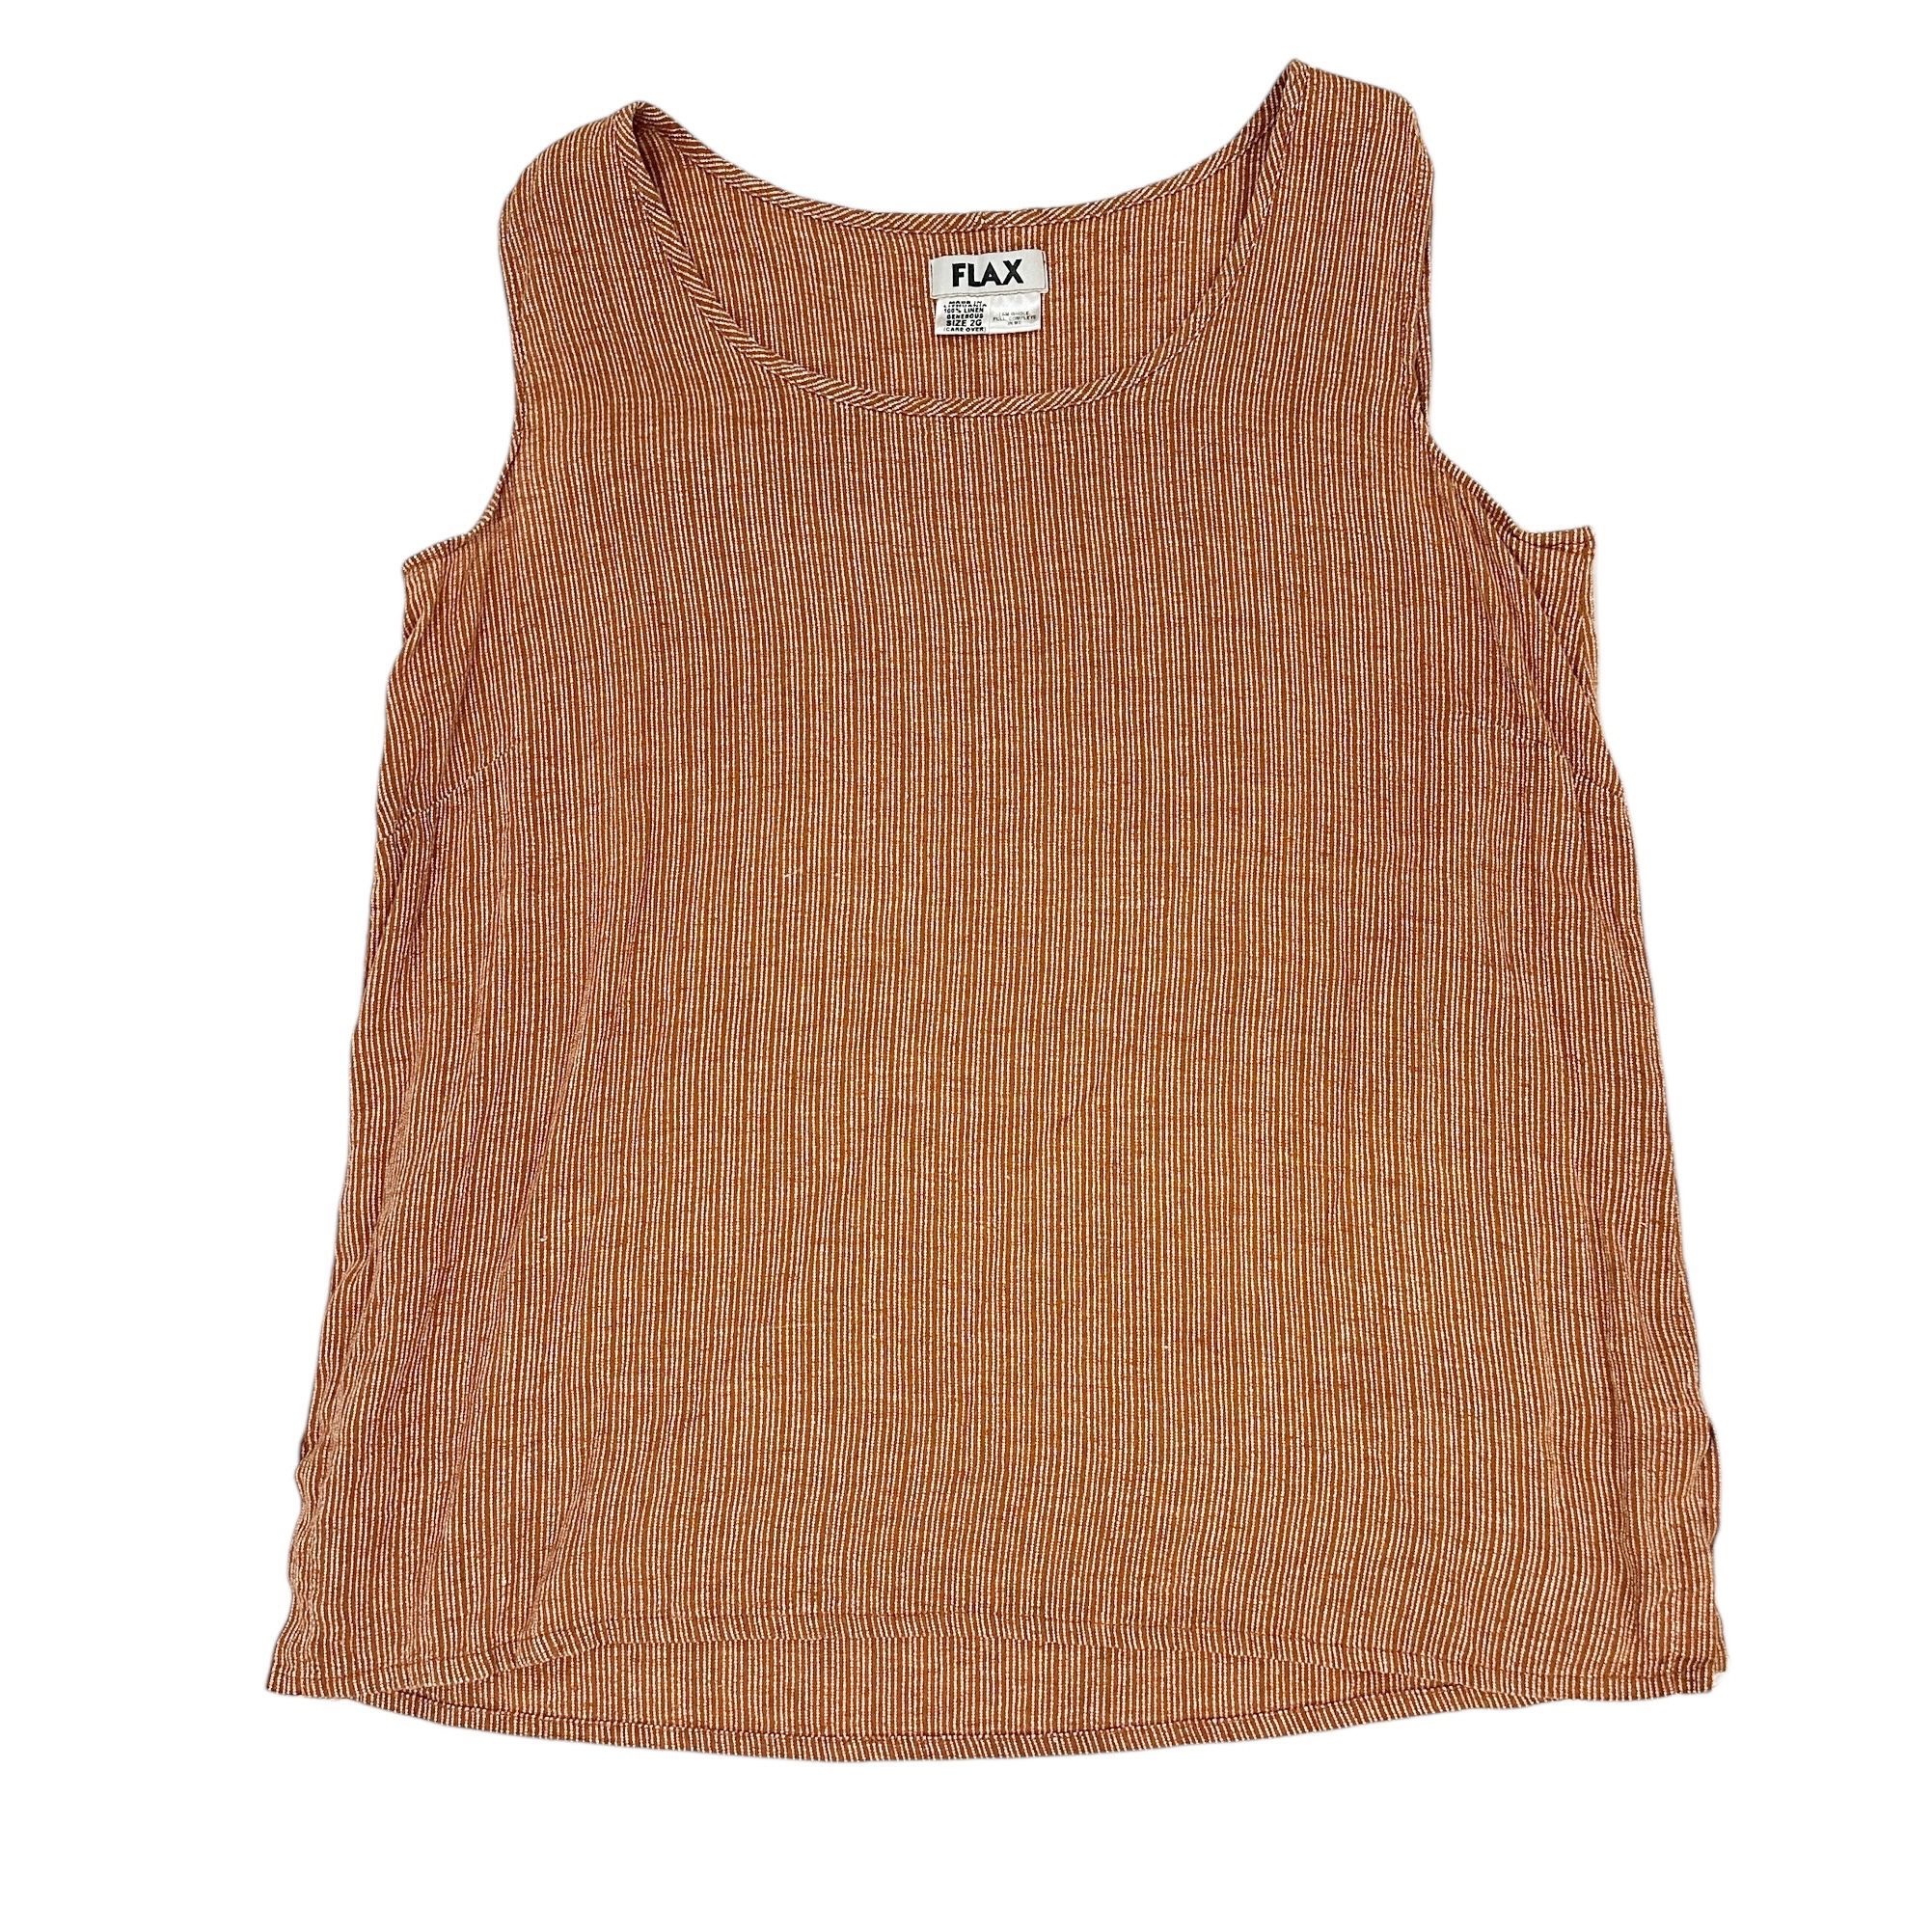 Flax Linen Tunic Tank Size 2G Sleeveless Lagenlook Fine Striped Top Brown Nude   This Flax Linen Tunic Tank is a fine addition to your wardrobe. It fe